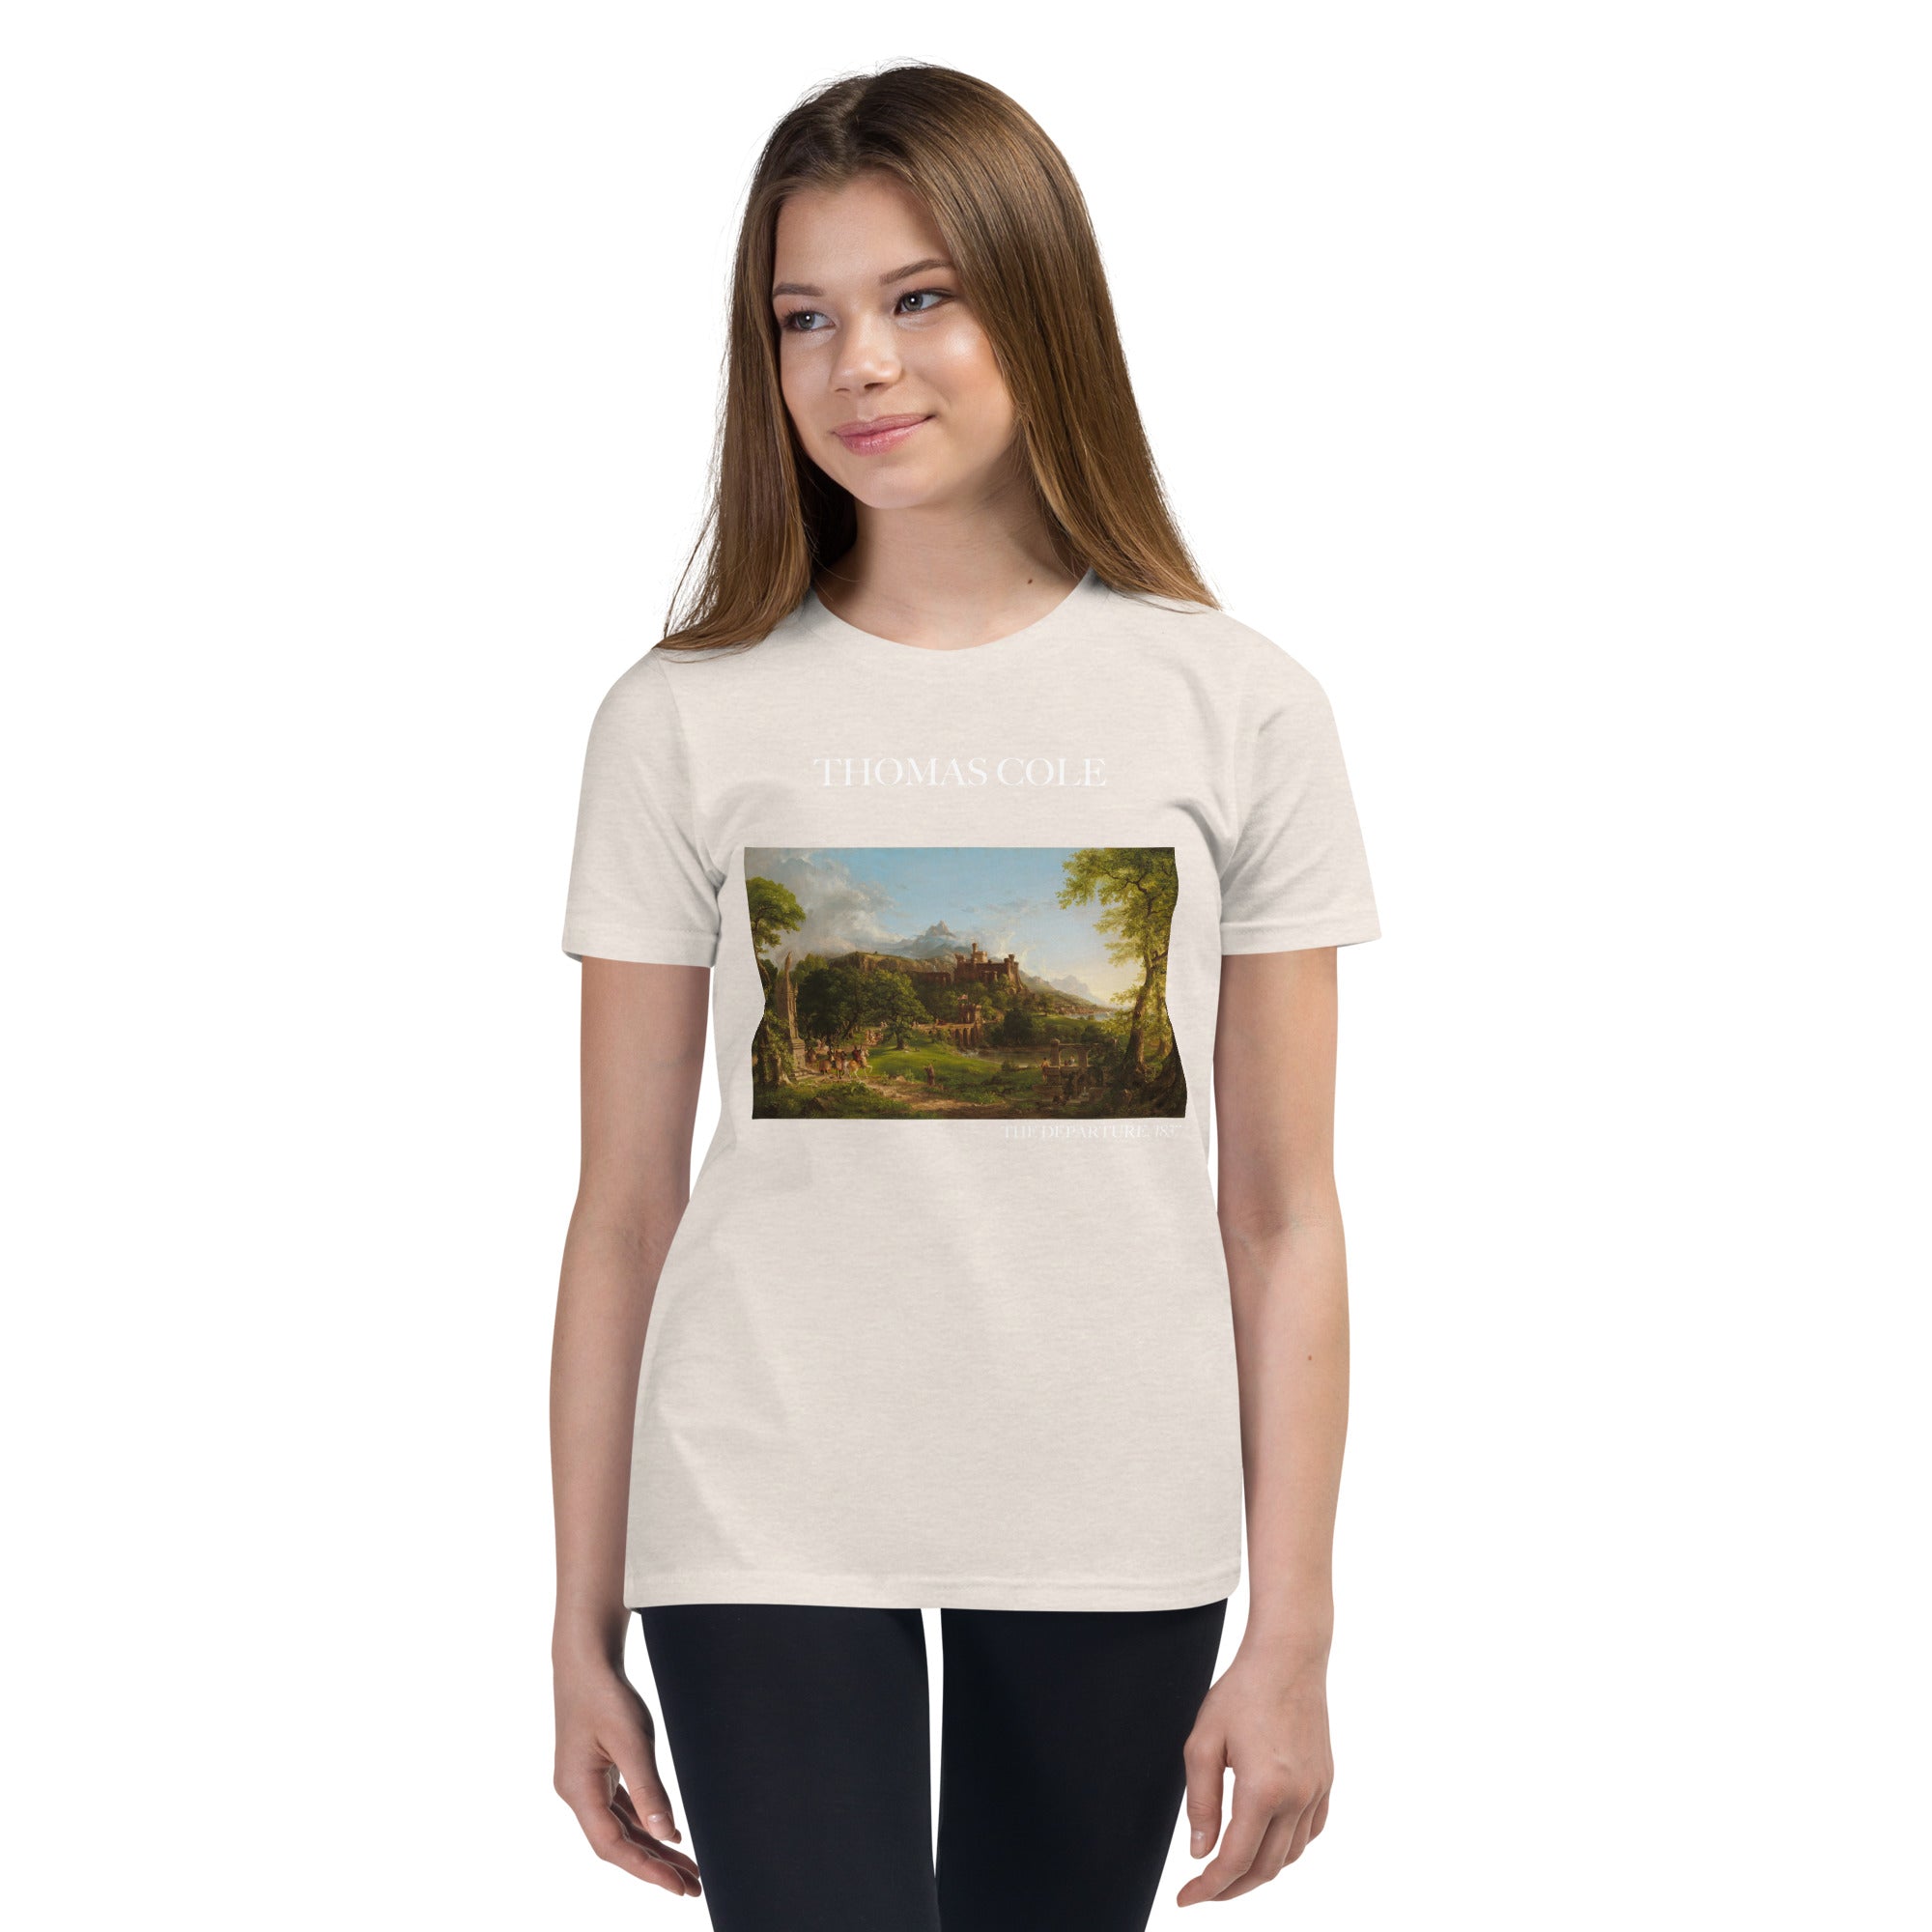 Thomas Cole 'The Departure' Famous Painting Short Sleeve T-Shirt | Premium Youth Art Tee